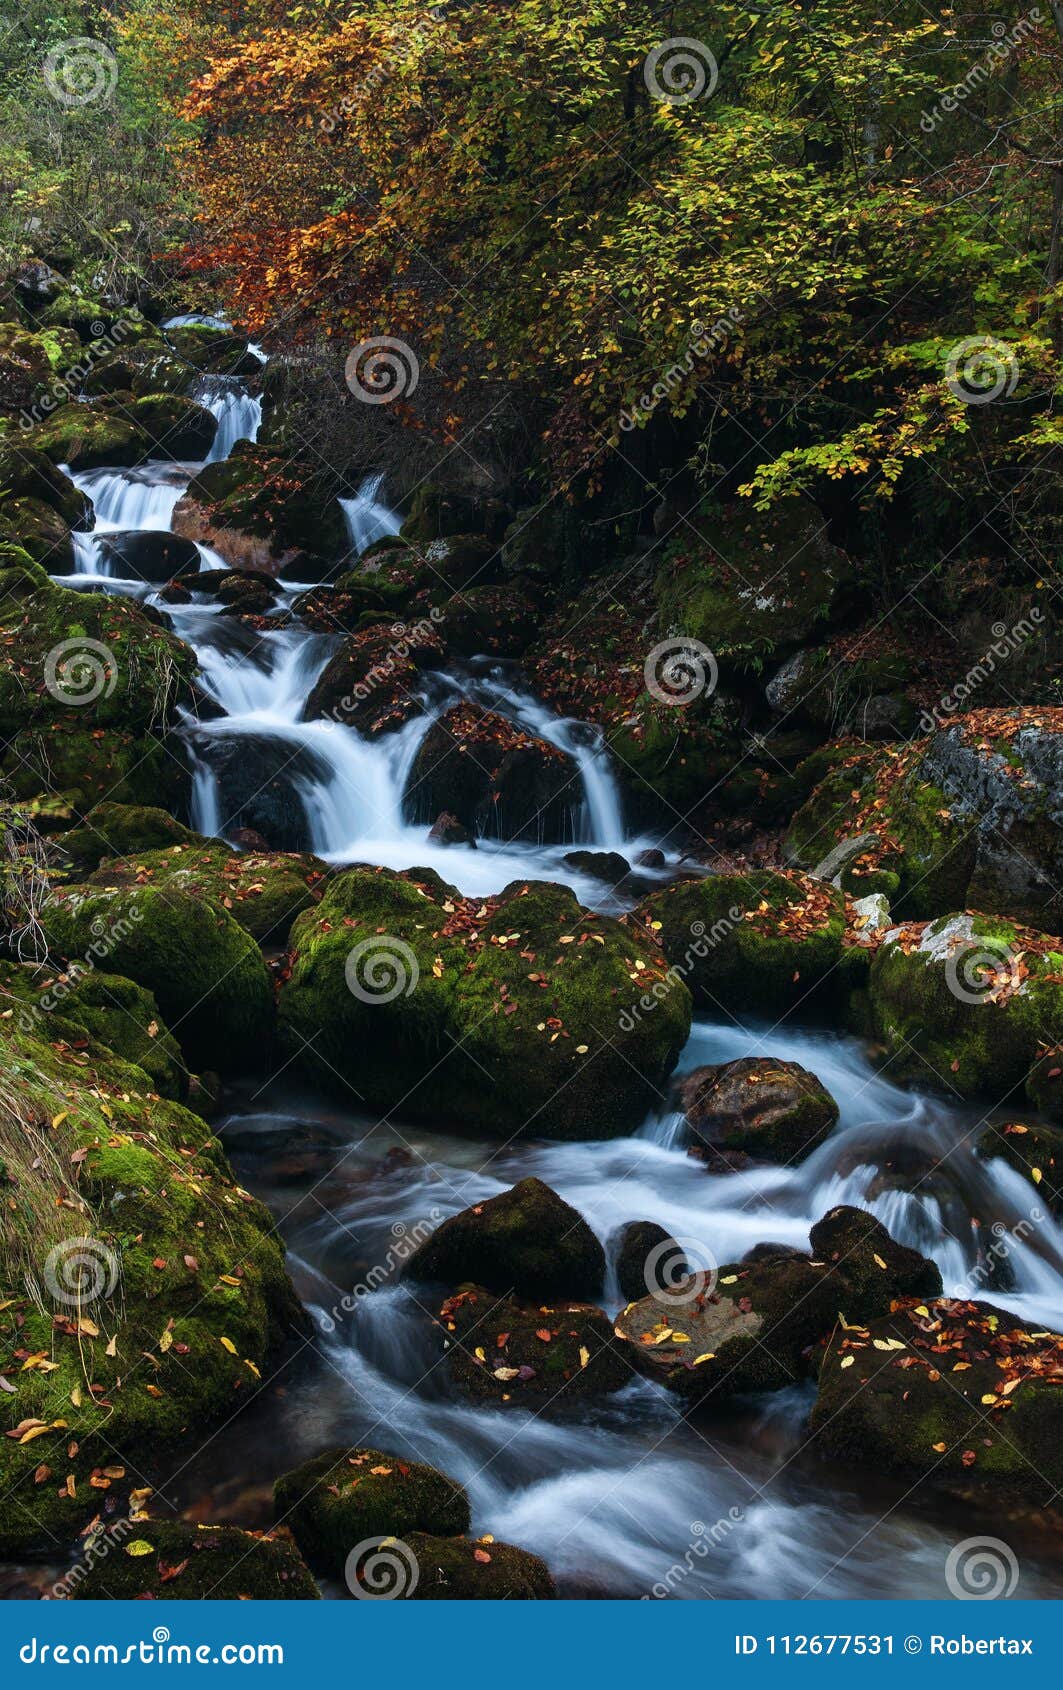 Soft Stream Flowing Over Mossy Rocks In The Colors Of Autumn Stock